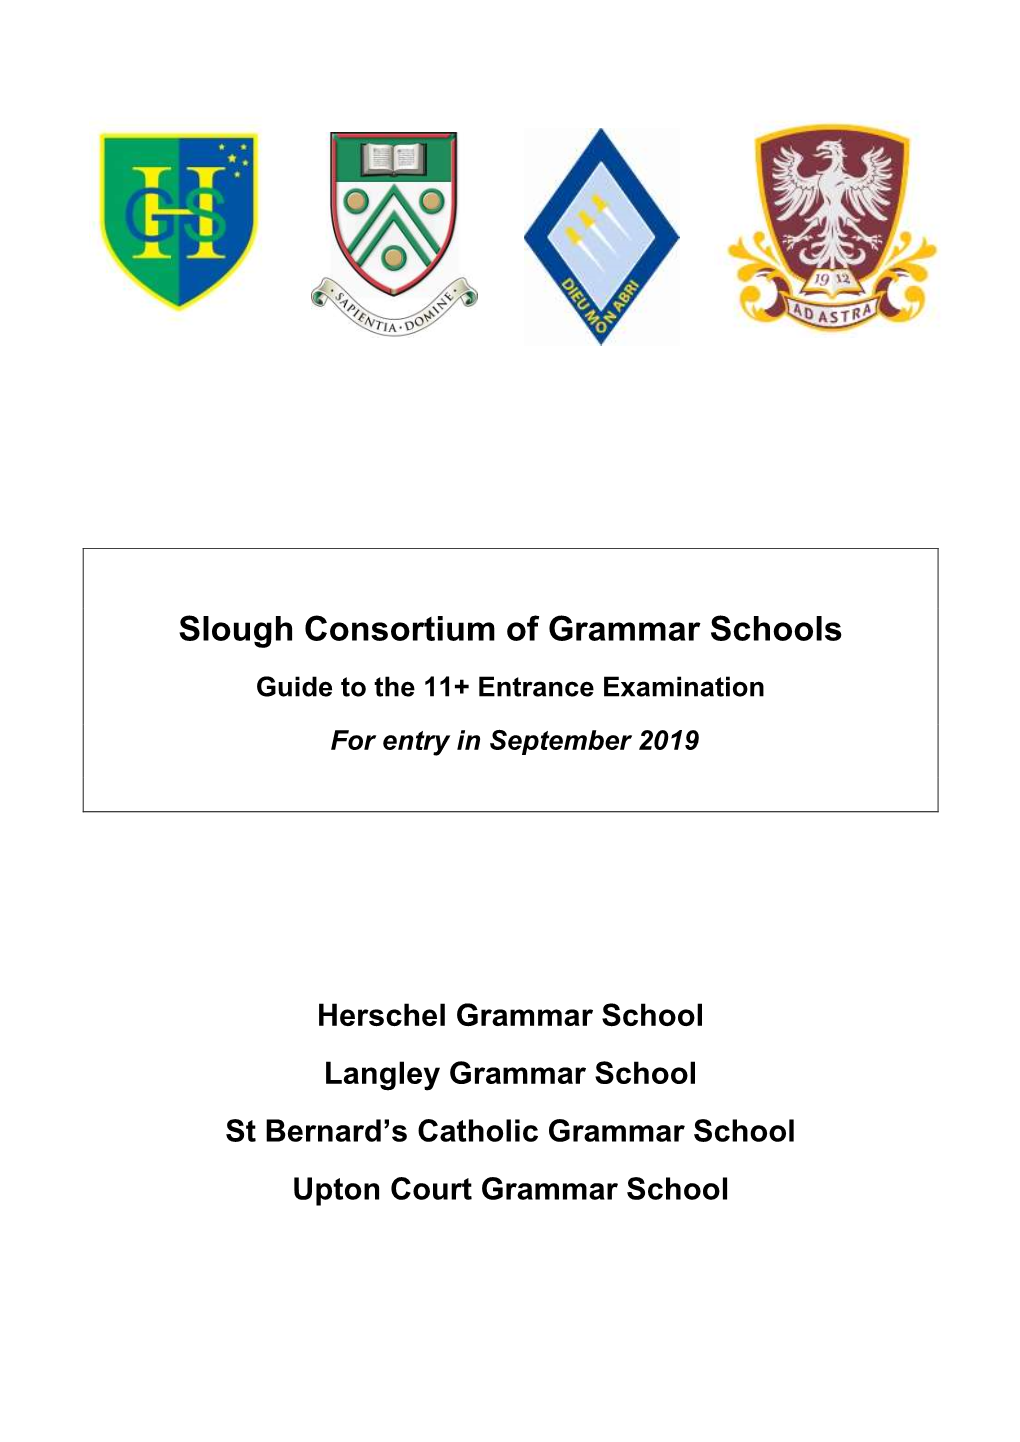 Slough Consortium of Grammar Schools Guide to the 11+ Entrance Examination for Entry in September 2019